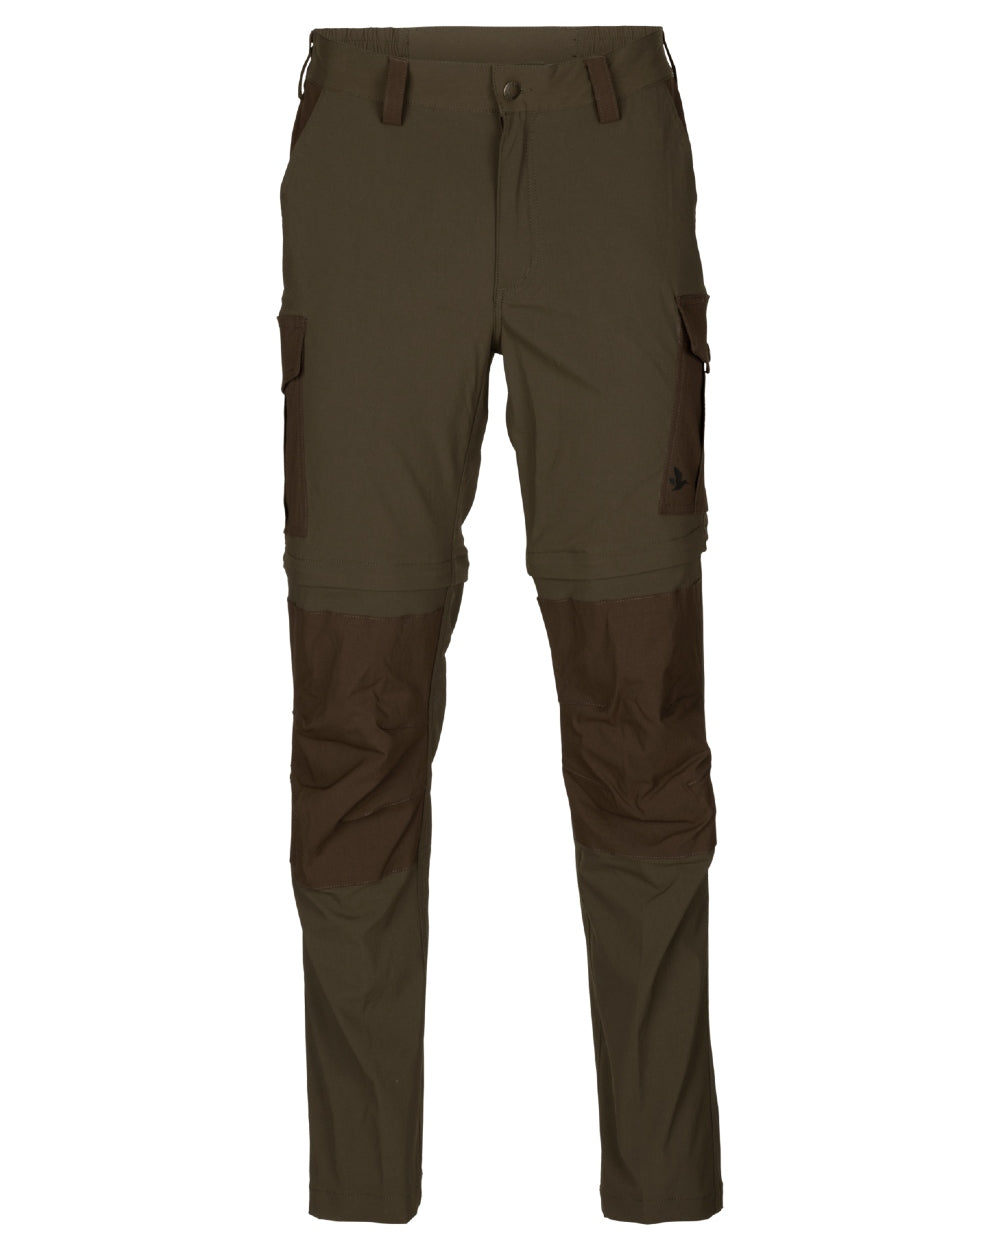 Pine Green/Demitasse Brown coloured Seeland Birch Zip-Off Trousers on white background